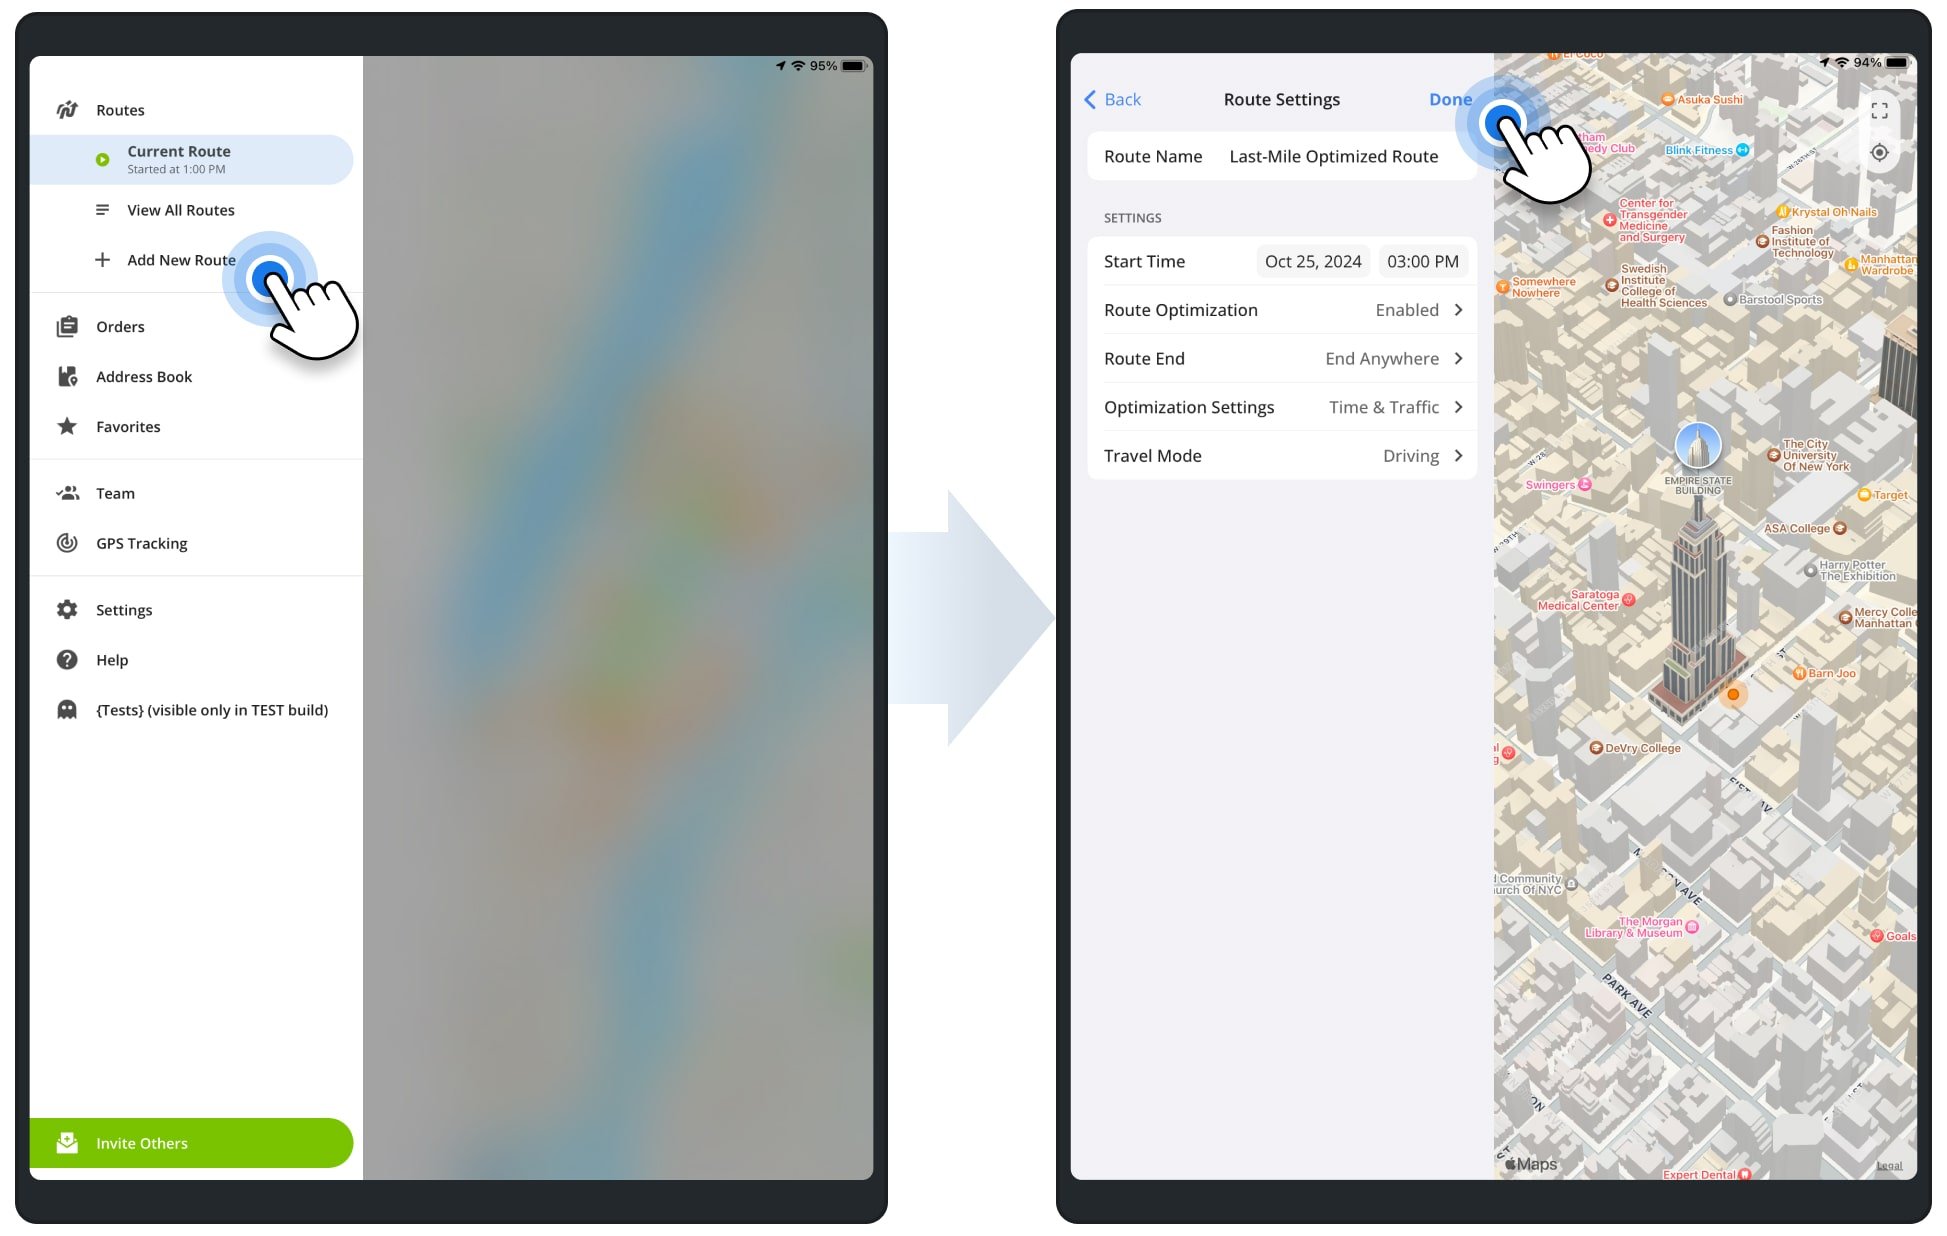 Planning a new route and setting up optimization settings on Route4Me's iPad Multi-Address Route Planner app for last-mile drivers.